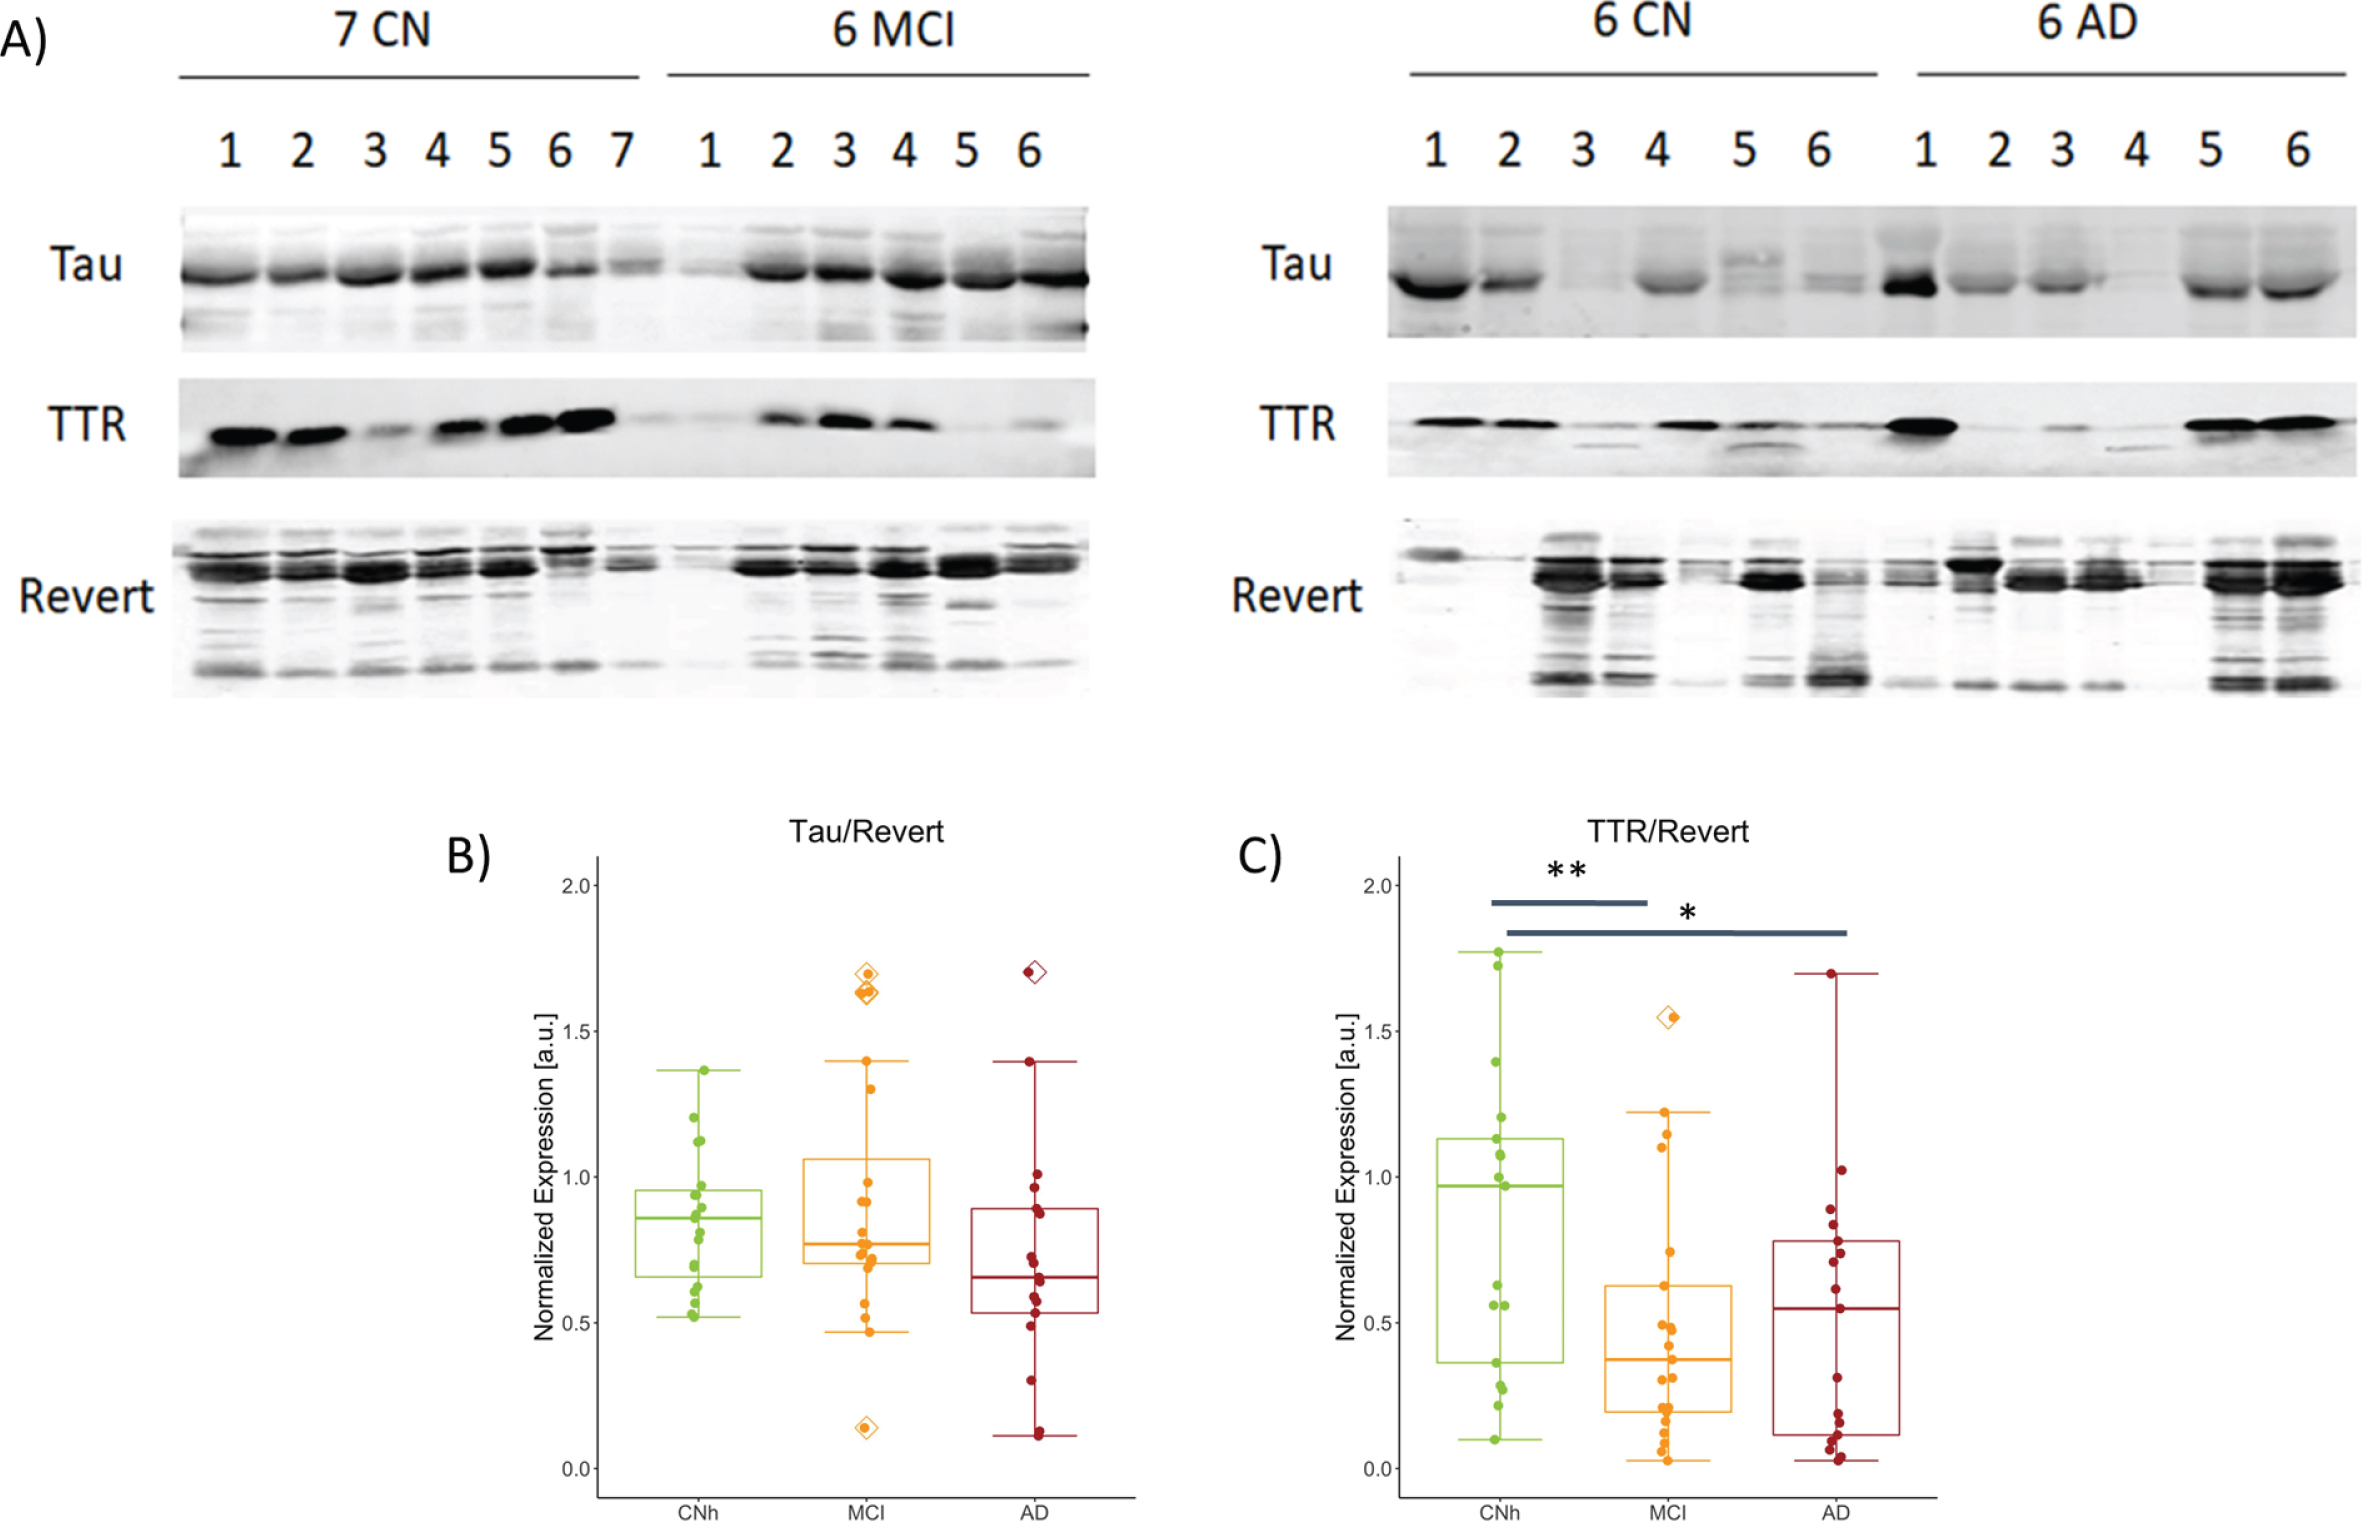 Abundance of TTR and S100A8 among the stages of AD. A) Representative images from western blot procedure to capture TTR and Tau bands, 17 kDa and 79 kDa respectively. No. of samples analyzed: CNh = 19, MCI = 21, AD = 17. Box plots with jitter across CNh, MCI, and AD groups show B) Tau expression normalized to loading control, Revert, CNh versus MCI t39 = 0.291, p = 0.437; CNh versus AD t35 = 0.278 p = 0.906; MCI versus AD t37 = 0.185 p = 0.241, C) normalized TTR, CNh versus MCI t39 = 0.007 p = 0.437; CNh versus AD t35 = 0.018 p = 0.019; MCI versus AD t37 = 0.845 p = 0.241. The whiskers on the boxplot represents the range of population and the horizontal line the median, *p < 0.05 and **p < 0.01.